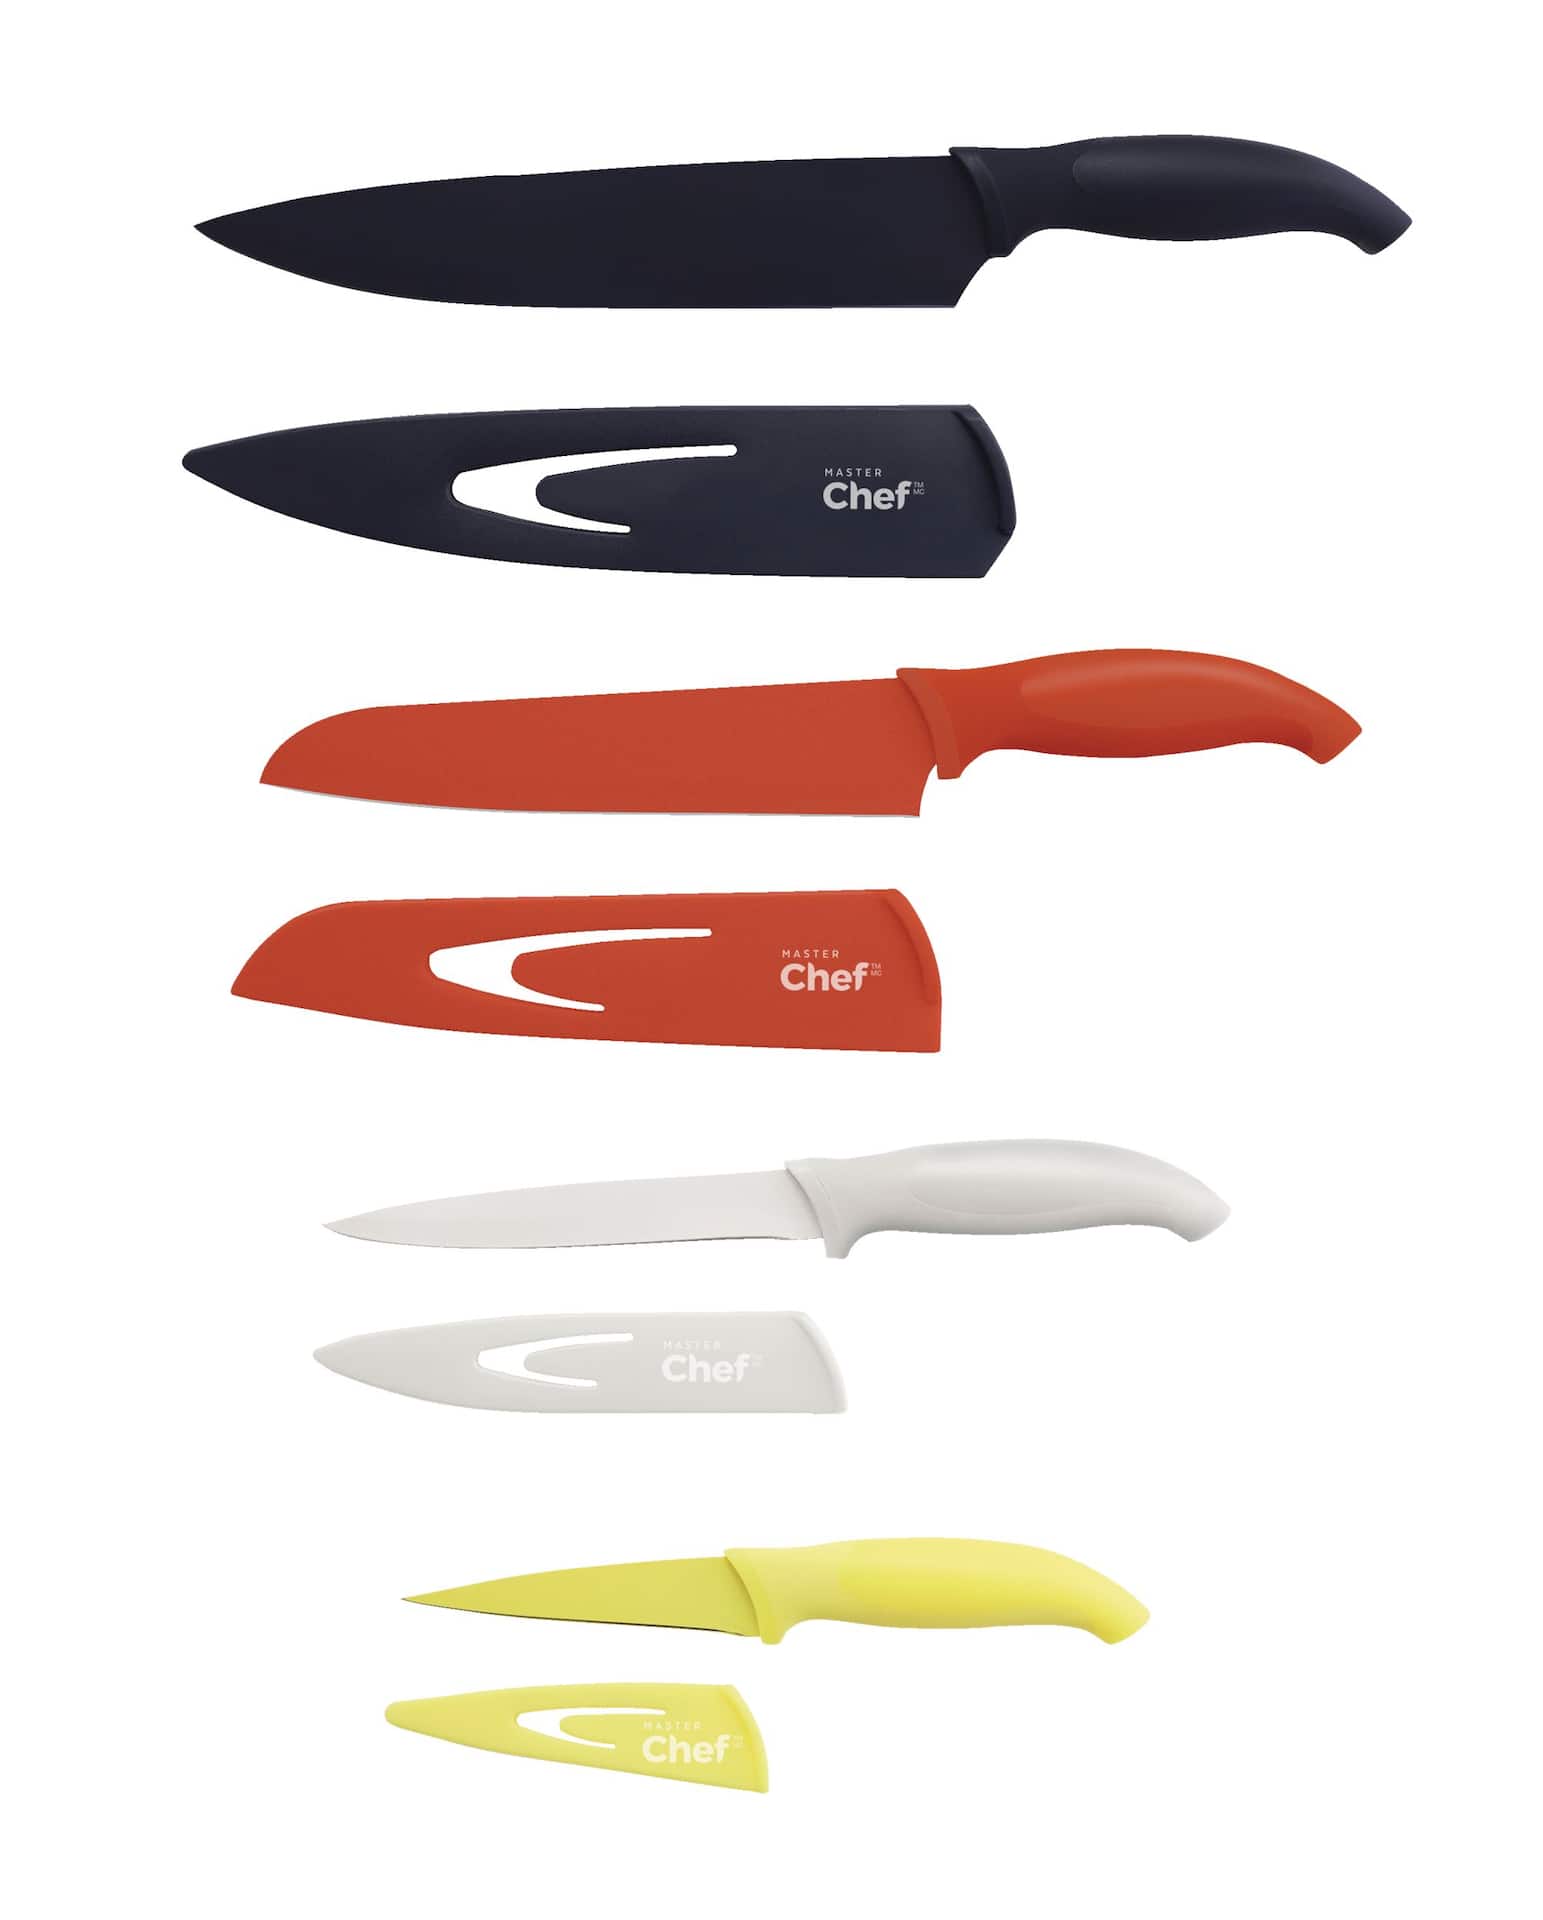 MASTER Chef Stainless Steel Knife Set with Sheaths, Dishwasher